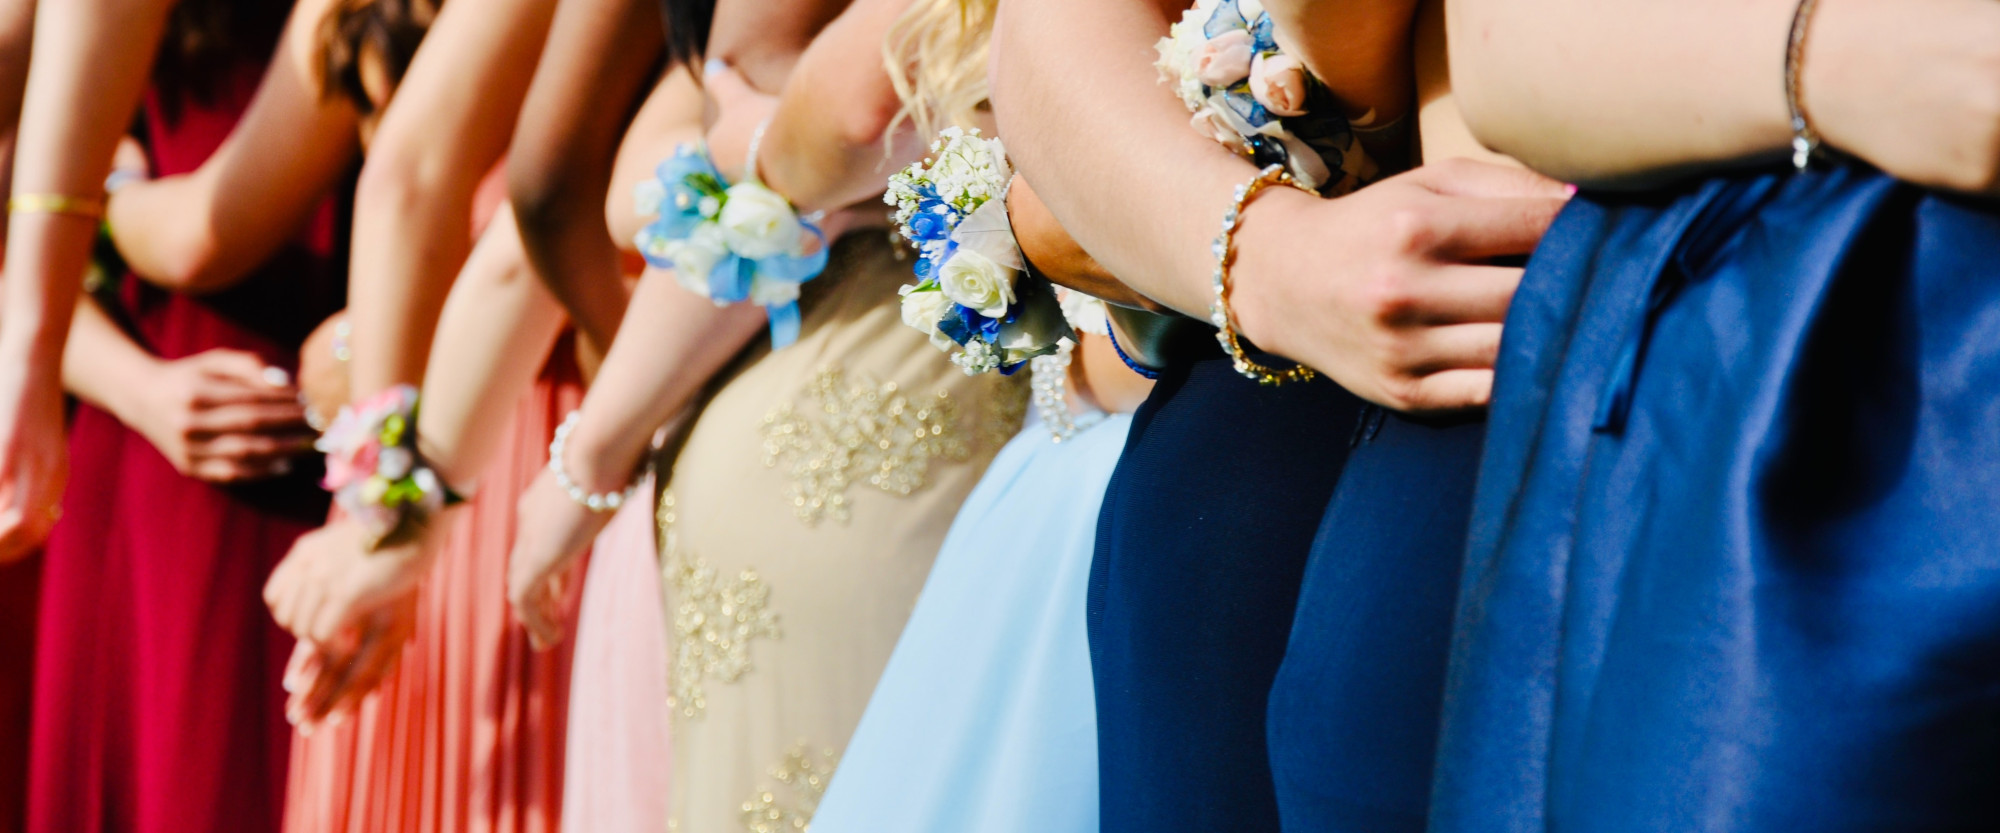 Girls in prom dresses Photo by Todd Cravens on Unsplash